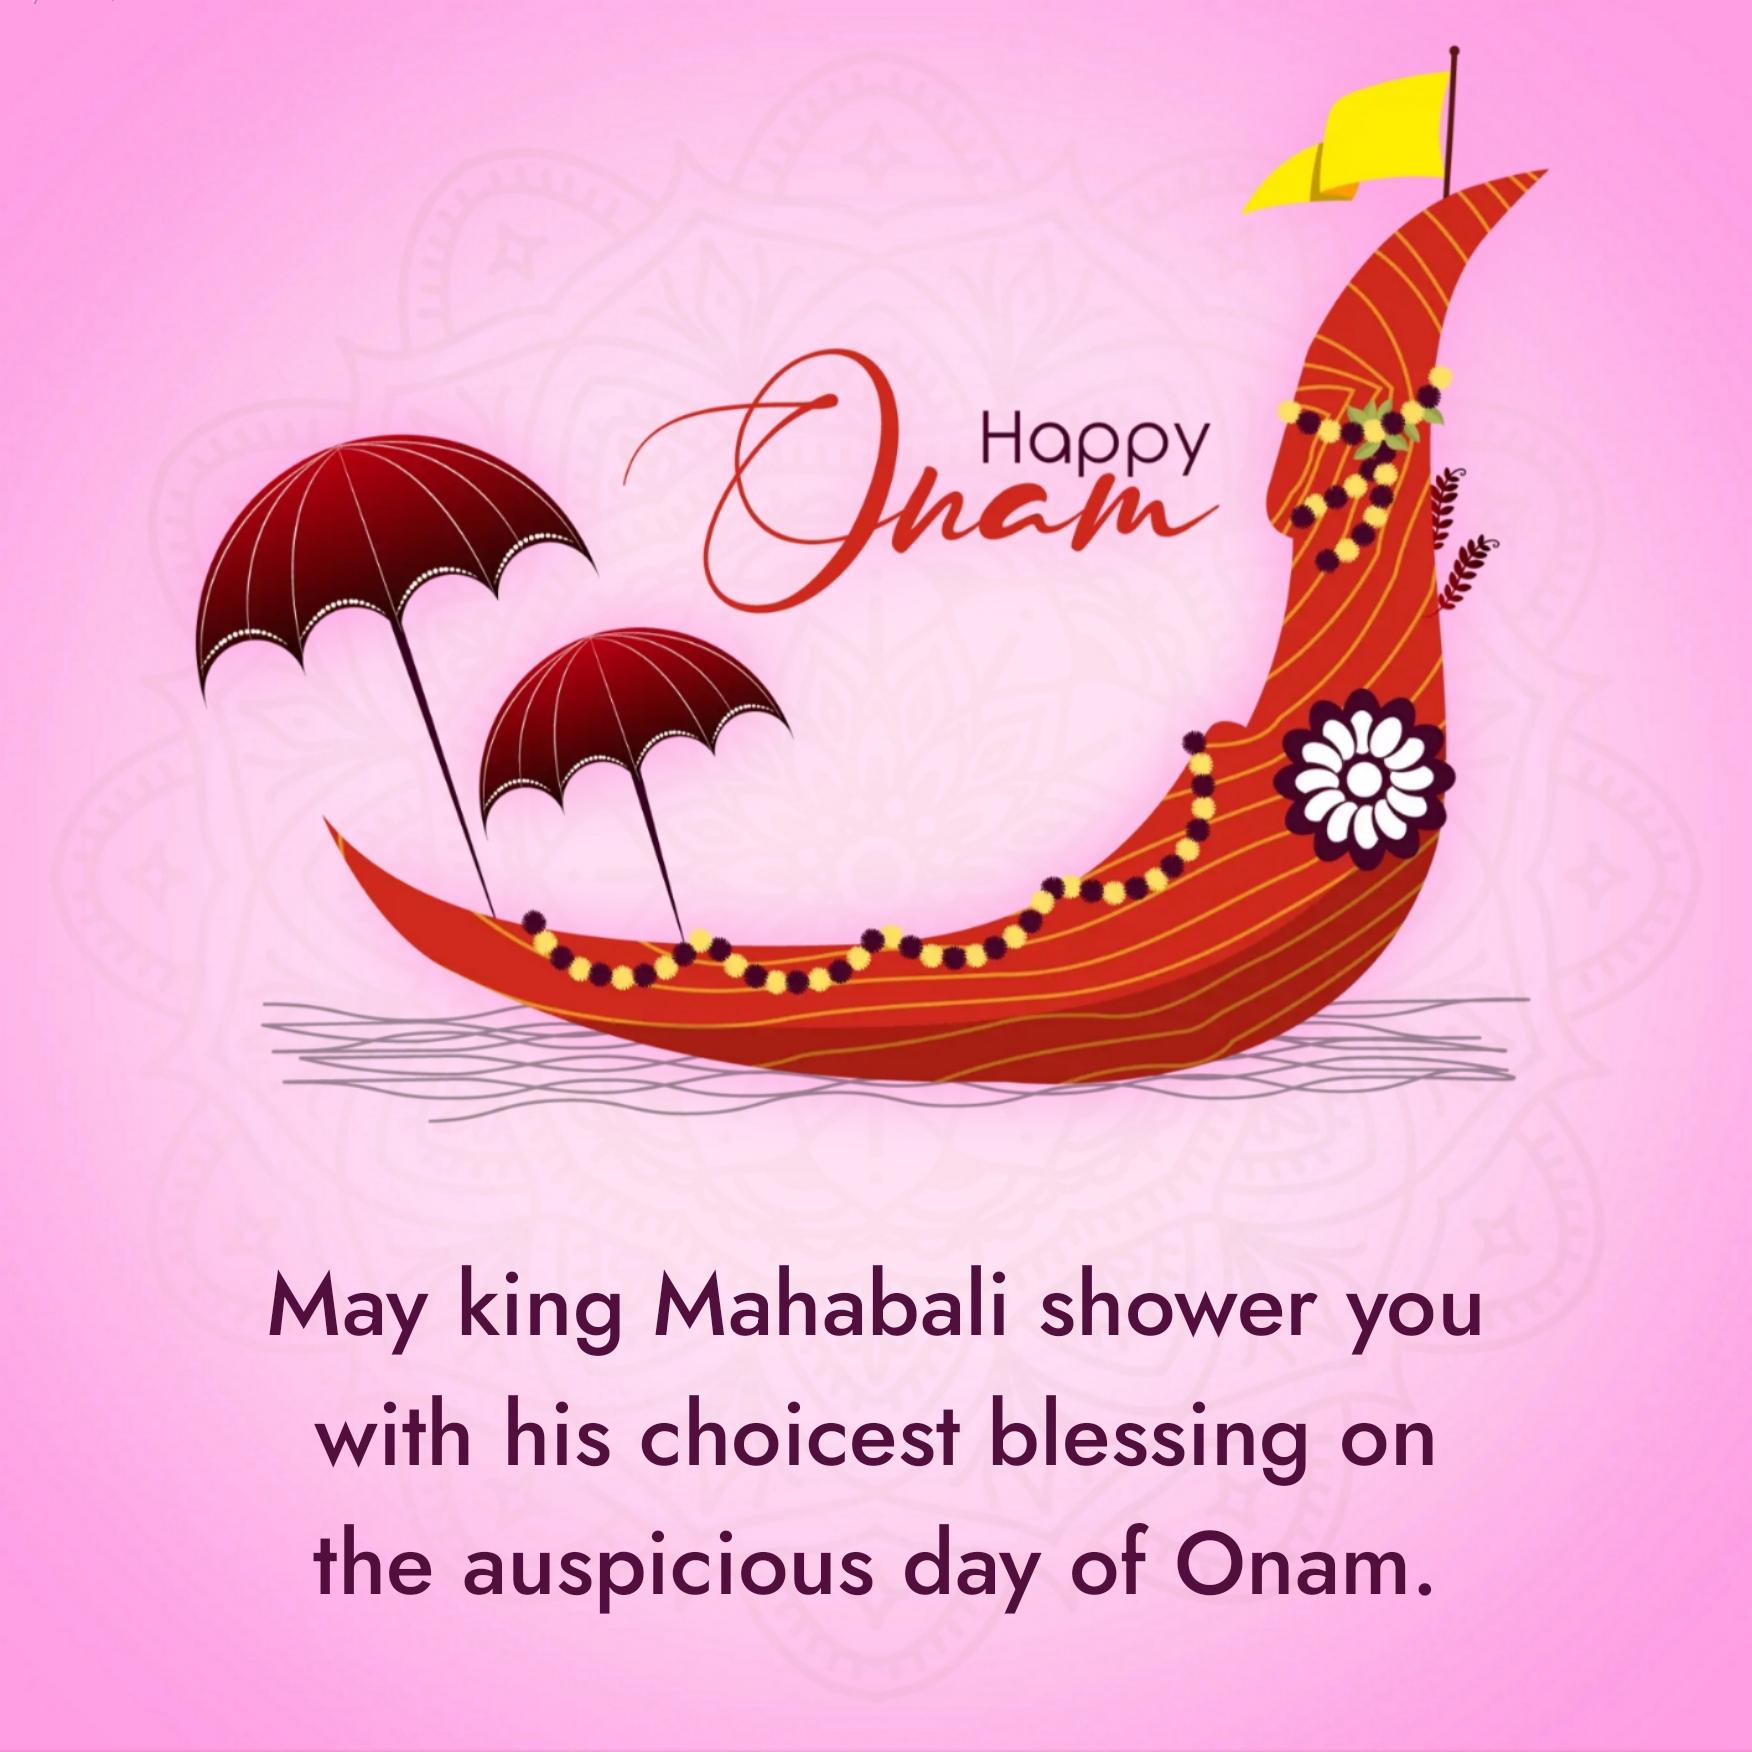 May king Mahabali shower you with his choicest blessing